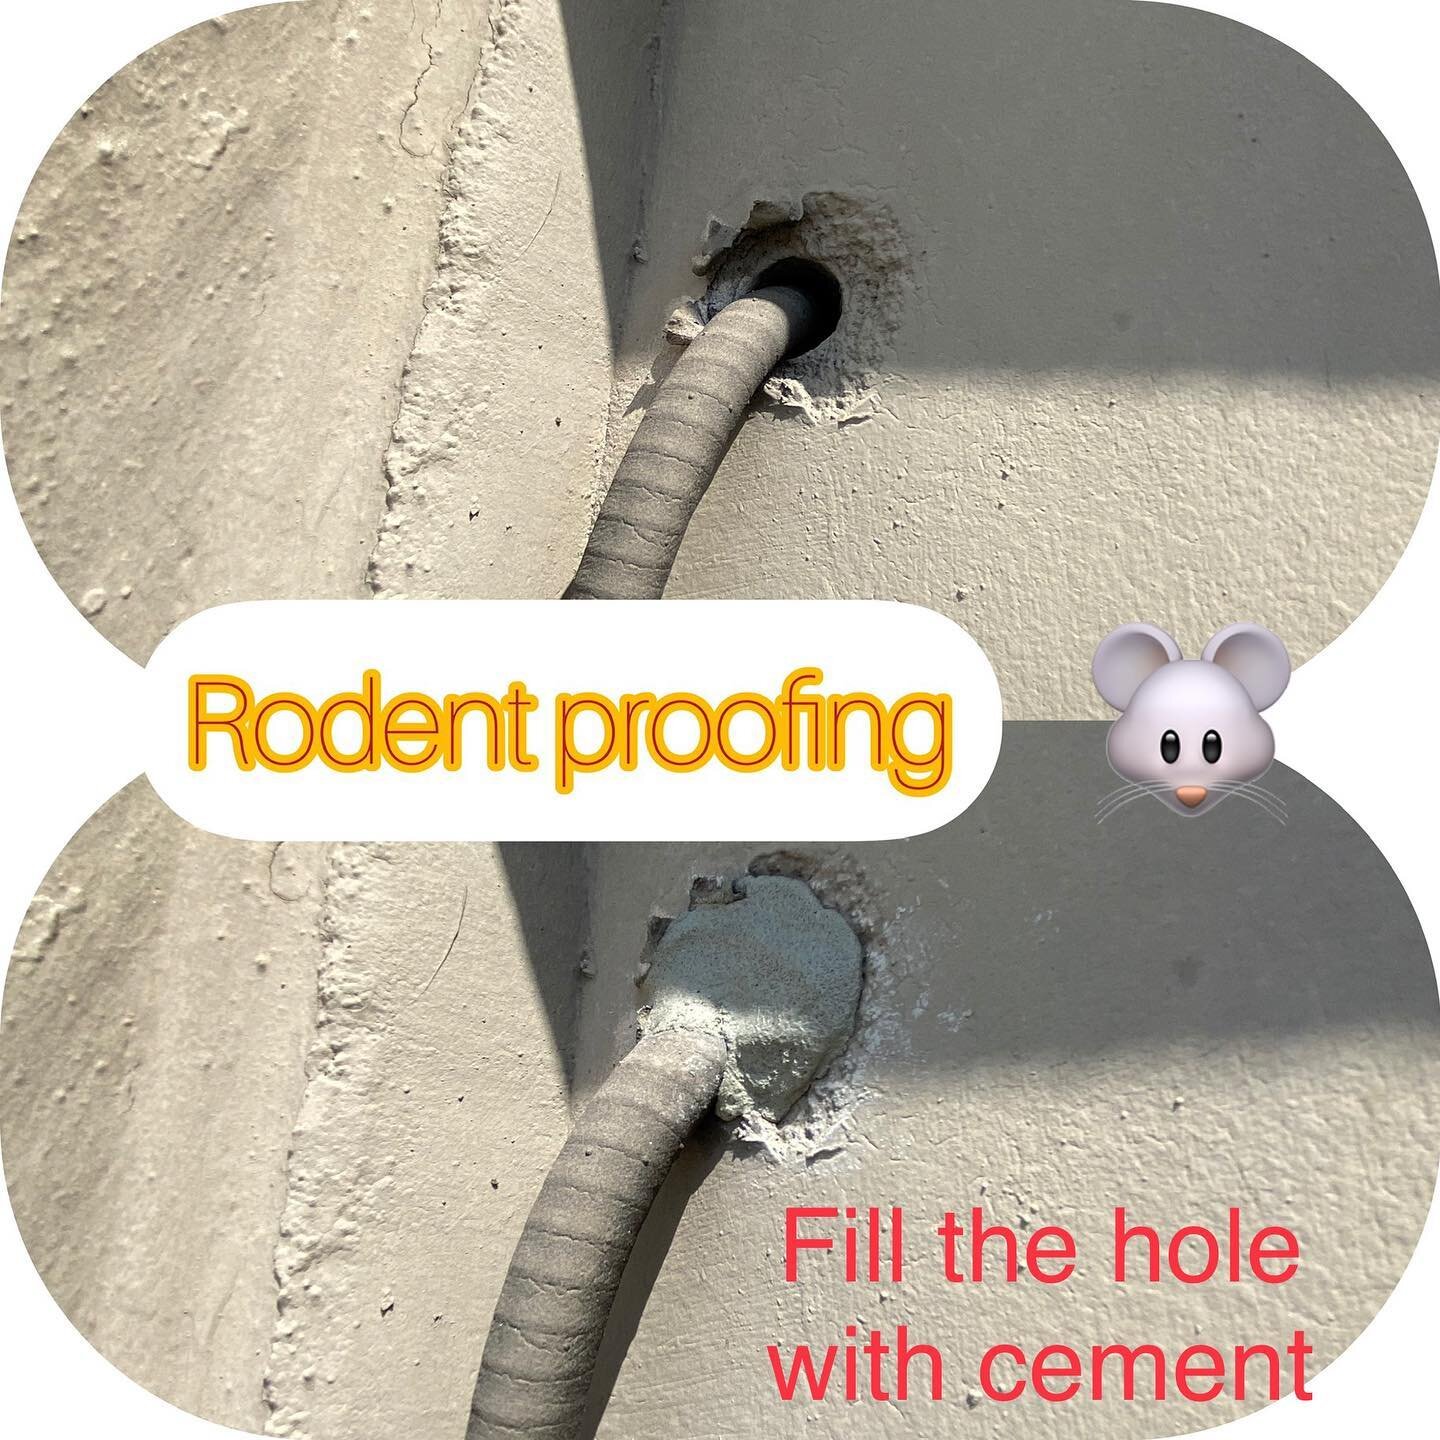 Fill the hole with cement for rodent proofing by Y&rsquo;s Pest Control. 424-571-0528
#pestcontrol #rat #mice #rodent